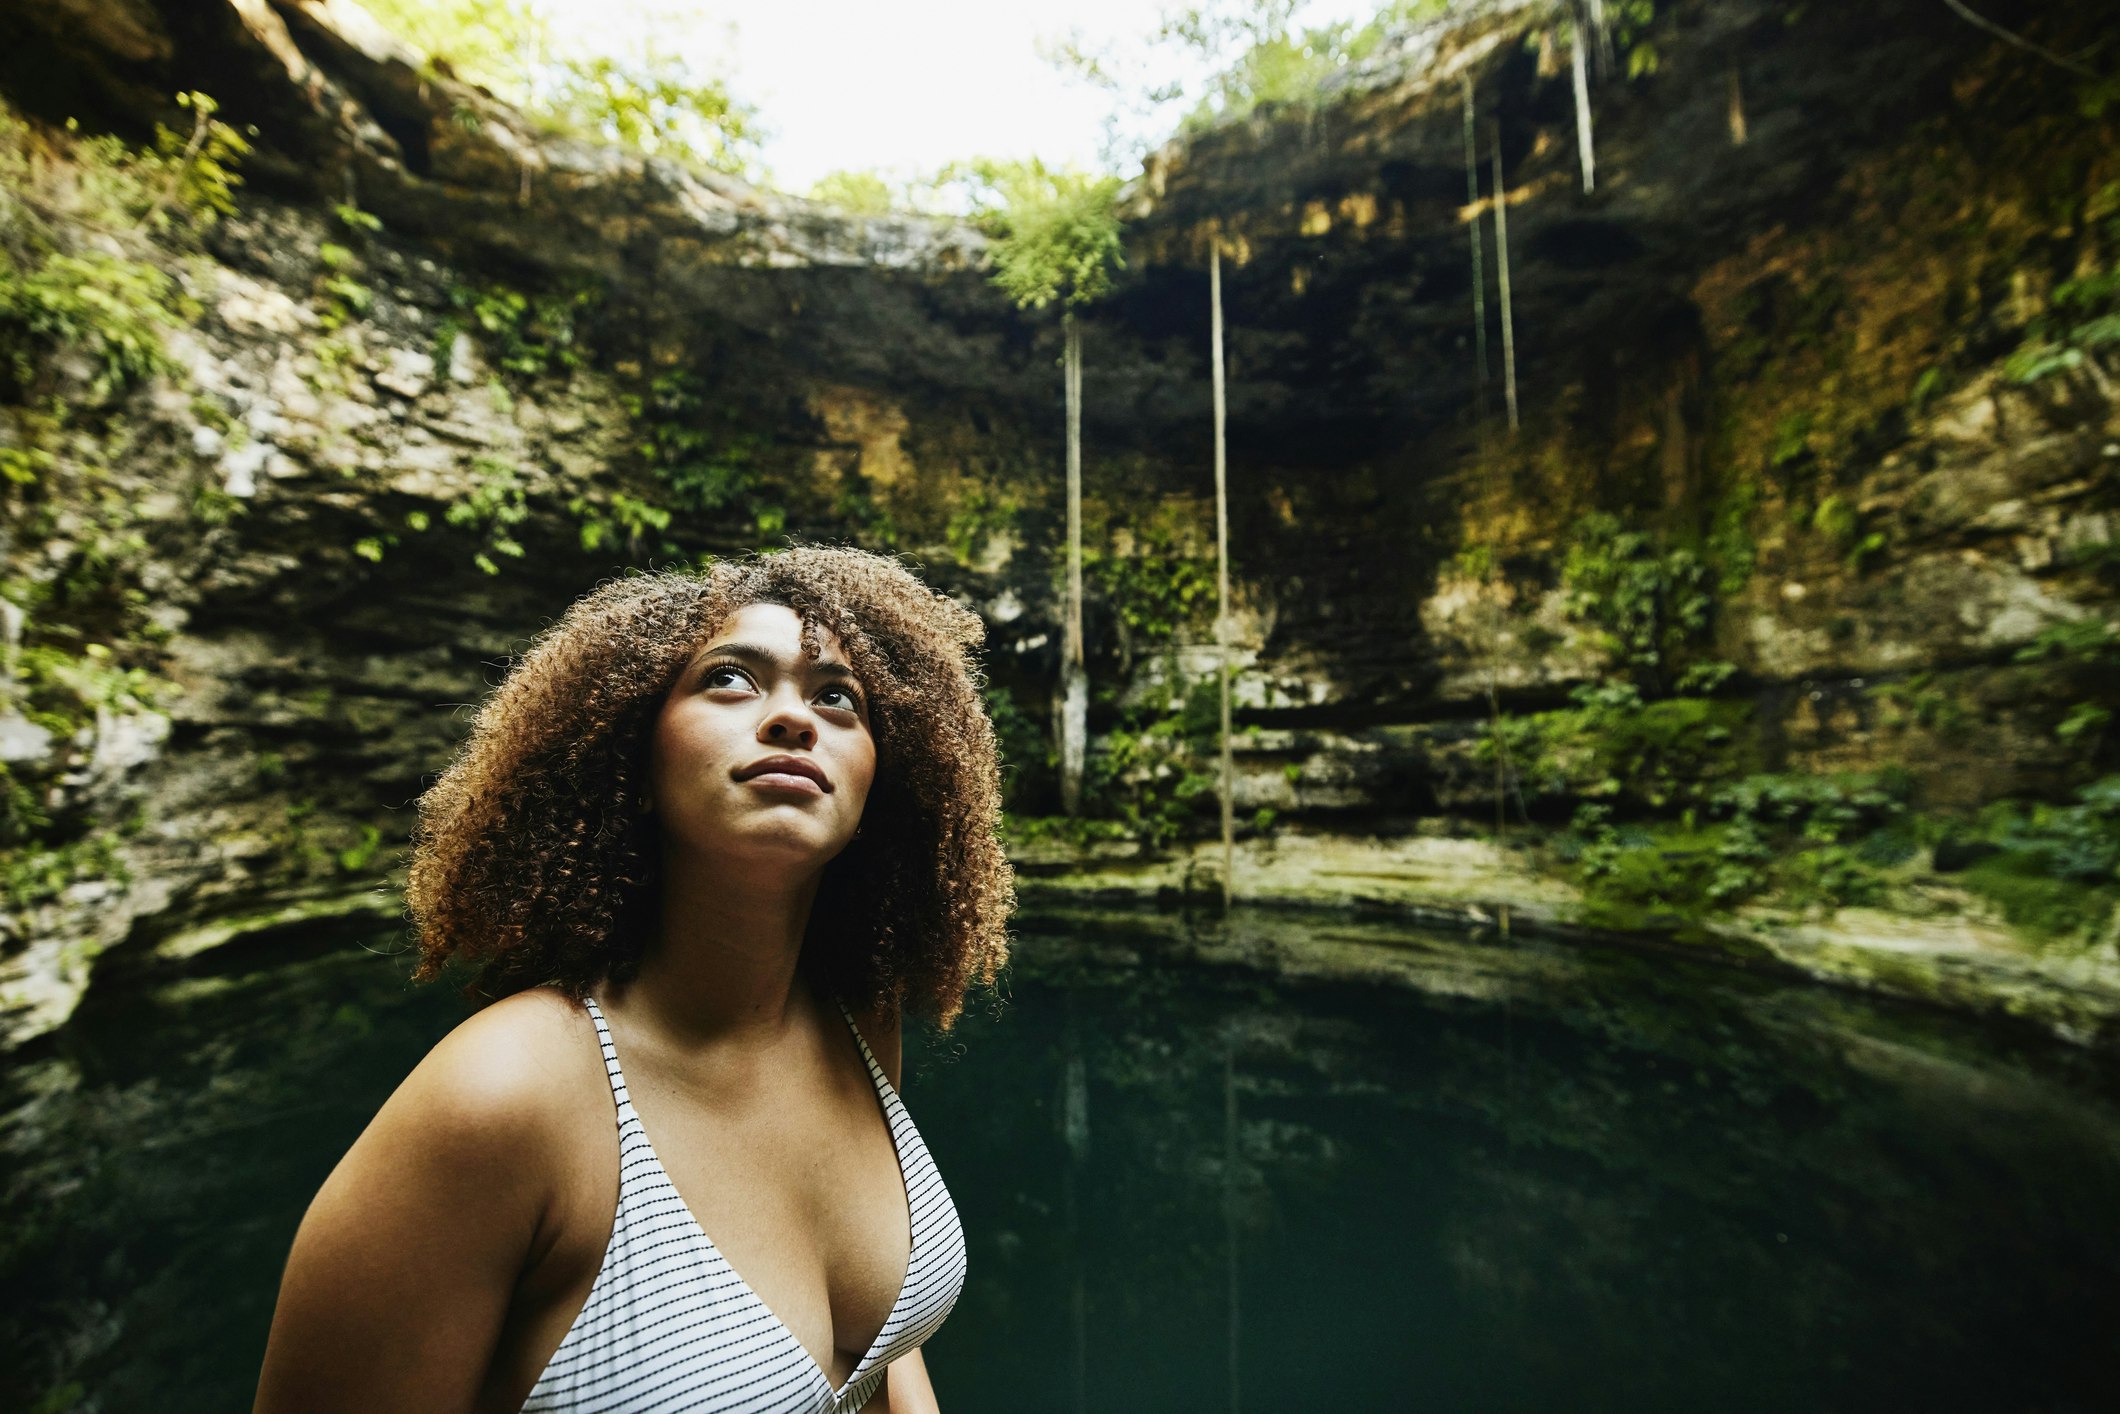 A woman standing near a cenote, a subterranean swimming hole, looking up at the natural walls around her in Mexico